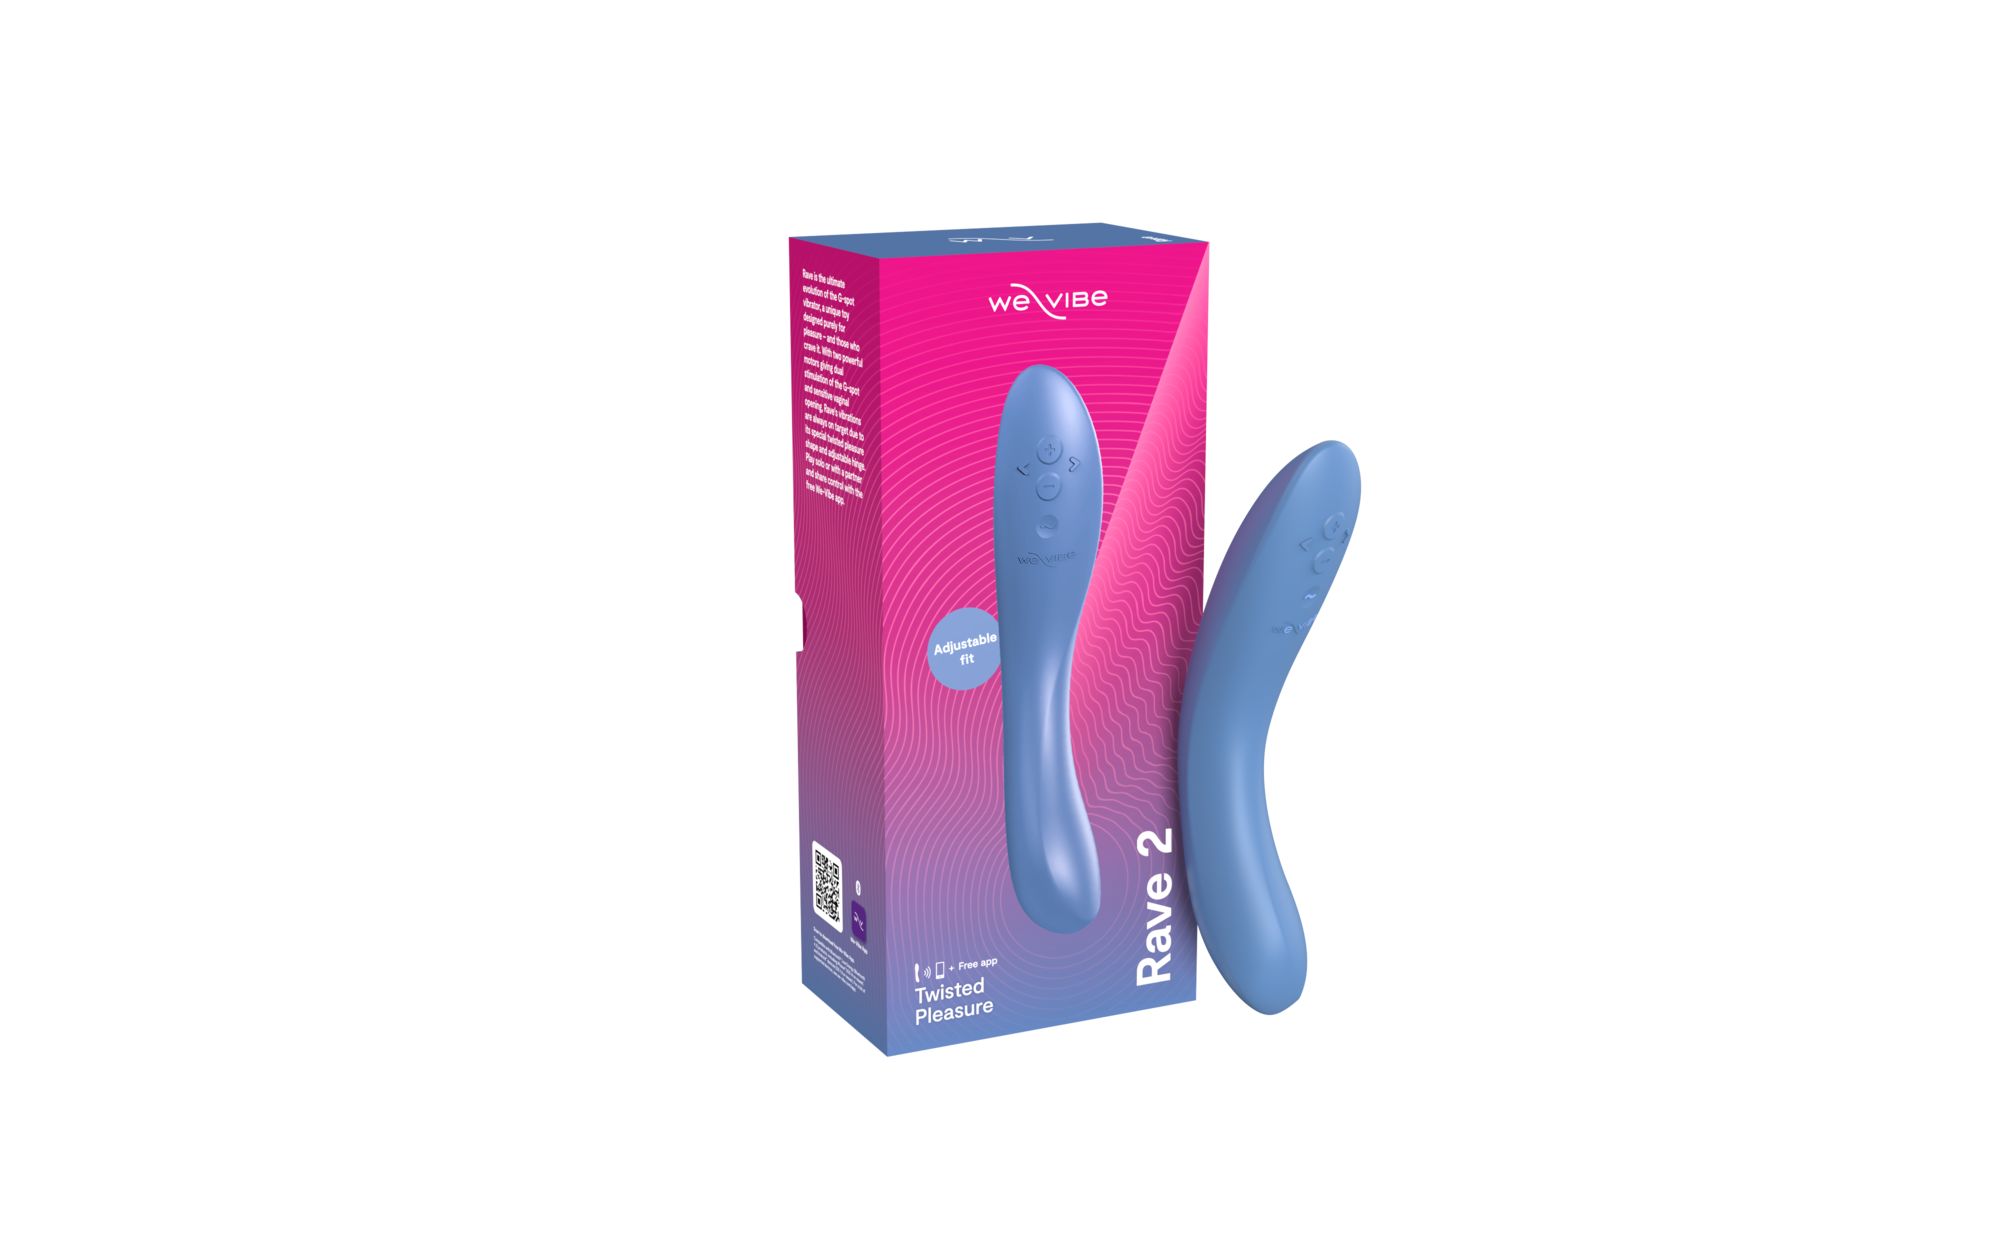 We-Vibe Rave 2 USB Rechargeable G Spot Vibrator with We-Connect App